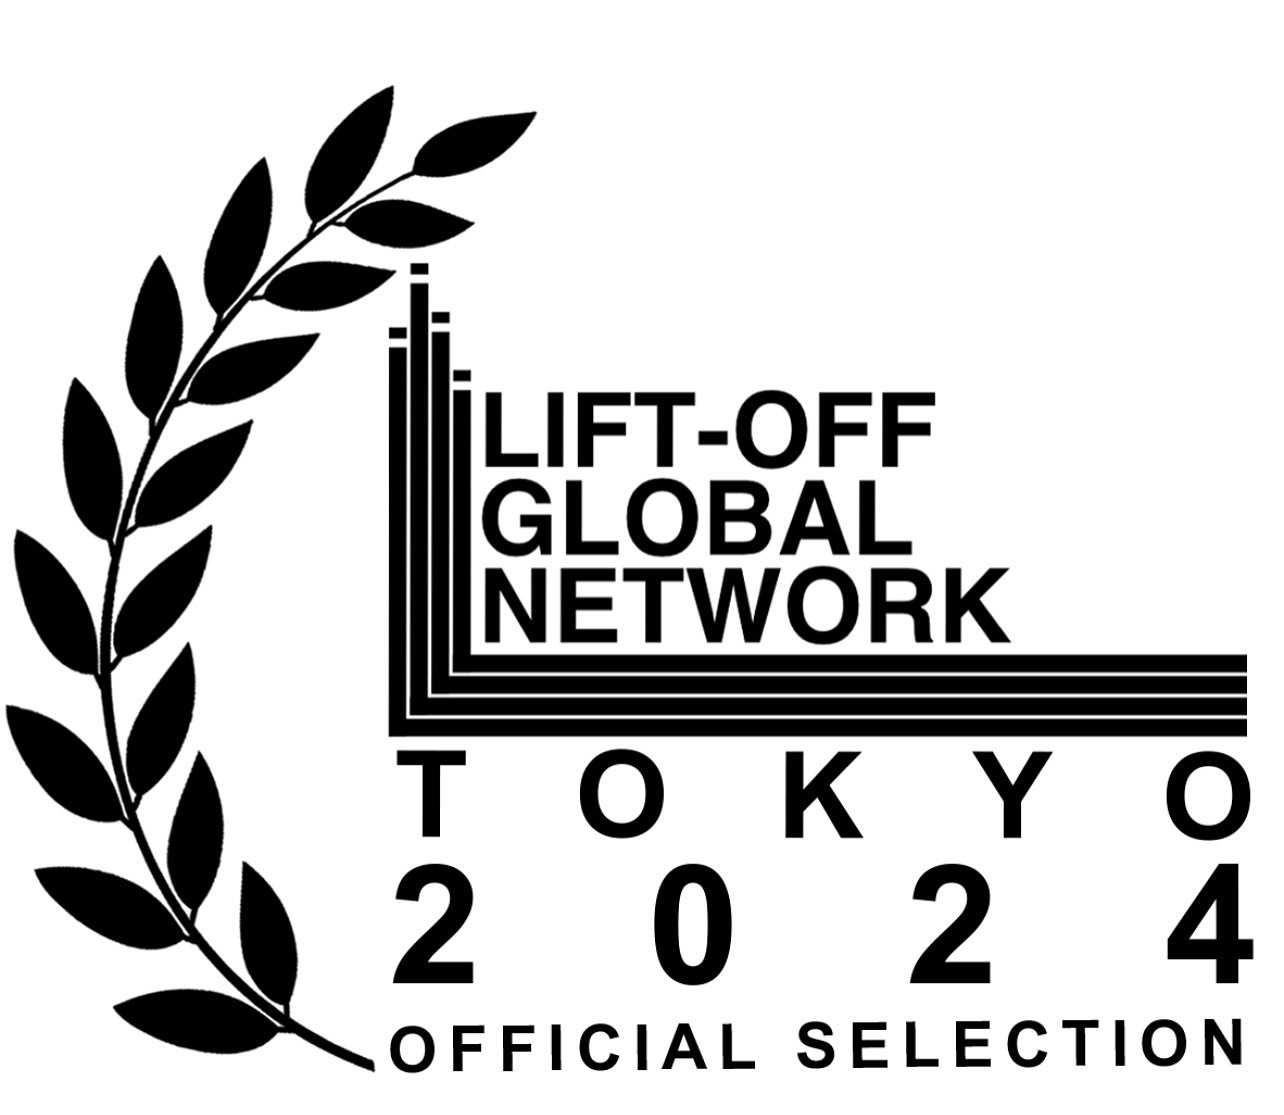 Thank you, Tokyo Liftoff Festival, for making our #operafilm an Official Selection. @peermusic_classical @encompassarts @naxosmusic @lastoriachi @chicagocollegeofperformingarts @534productions